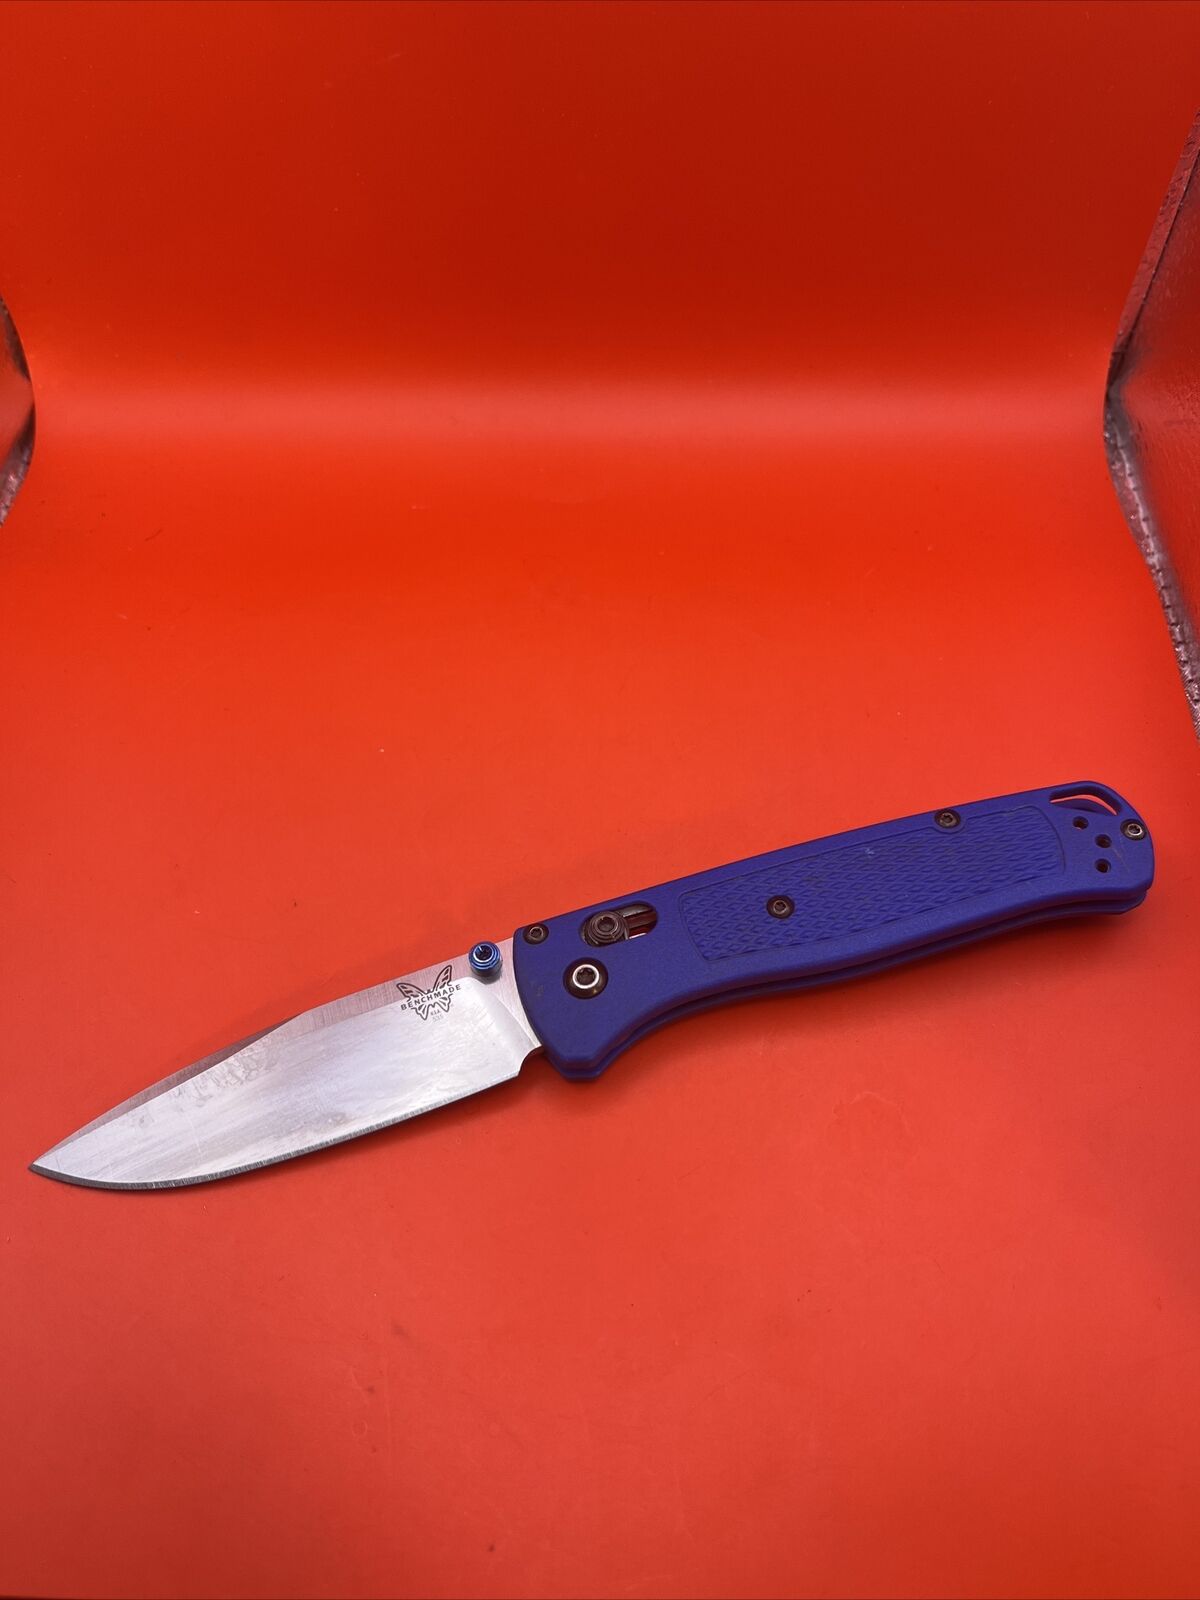 Benchmade 535 Bugout™-EVERYDAY CARRY AXIS LOCK KNIFE